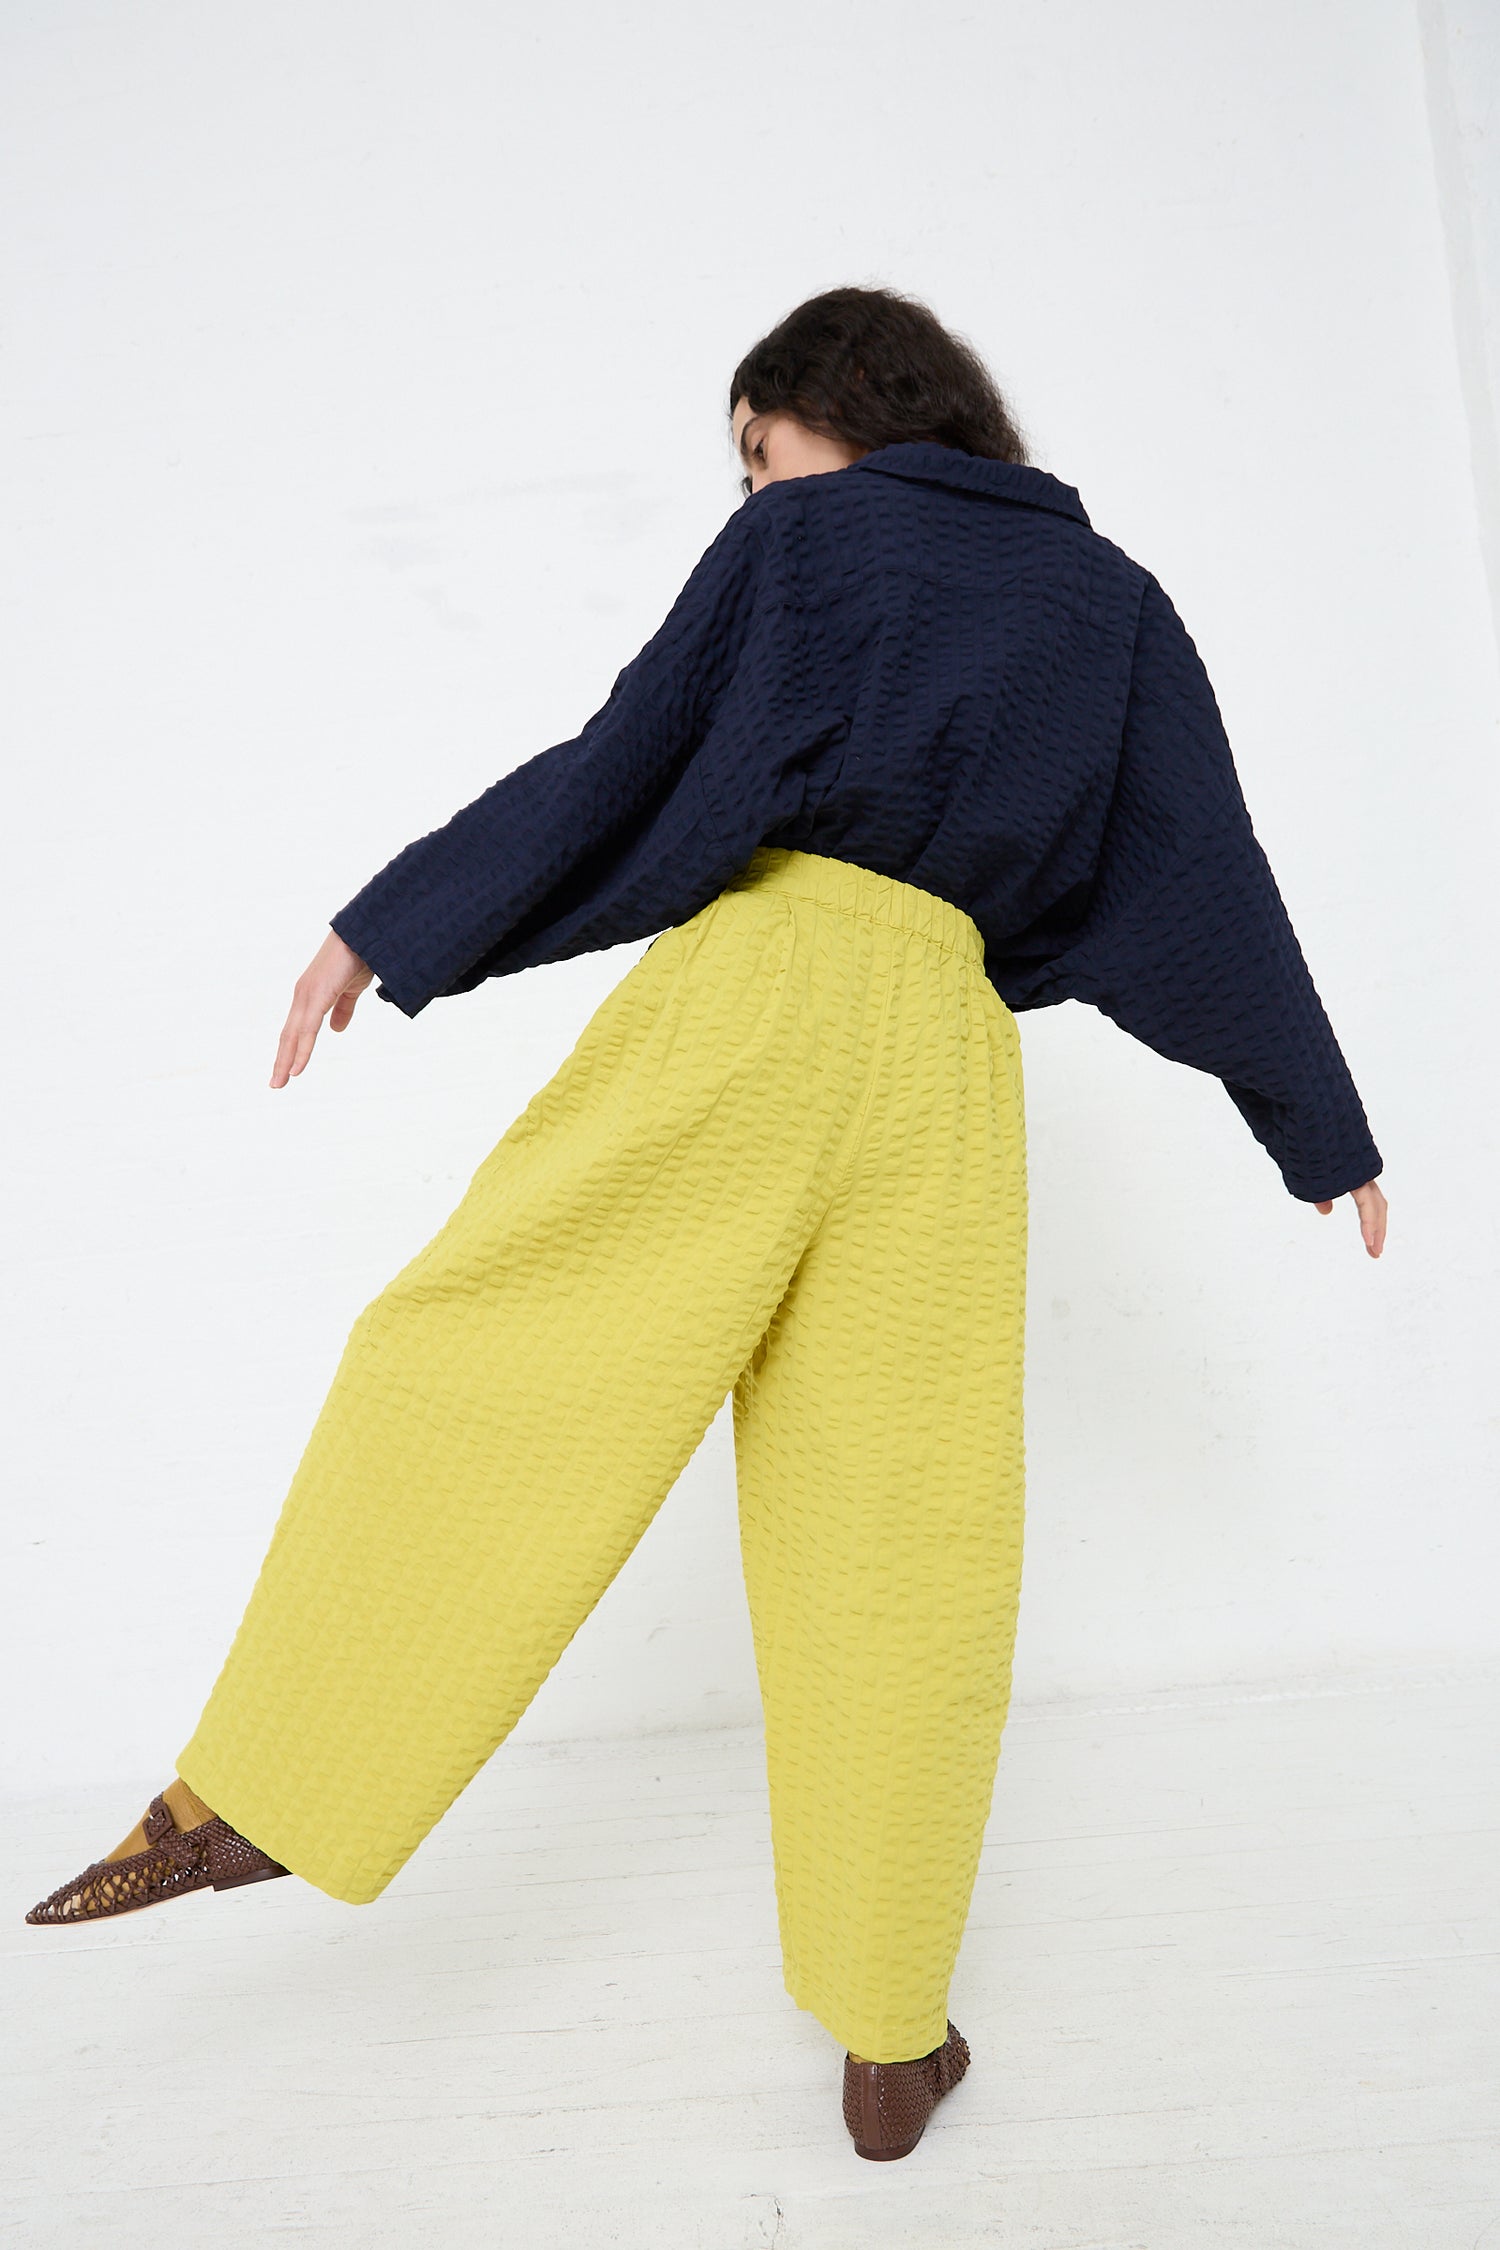 A person wearing a navy blue textured top and Black Crane's Cotton Seersucker Wide Pant in Turmeric with brown patterned shoes, striking a pose with their back to the camera in a white room.